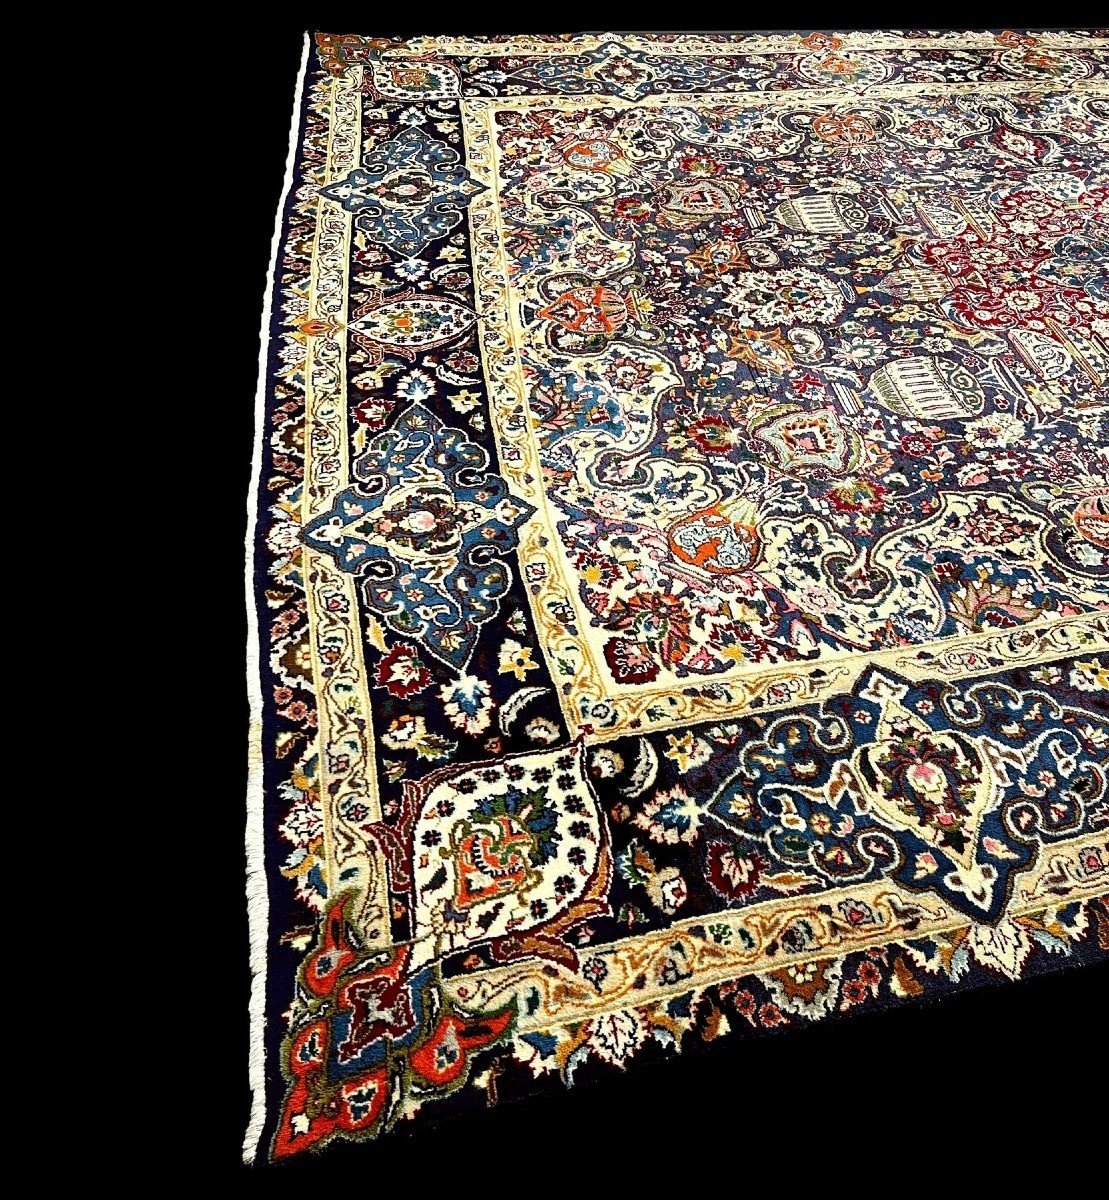 Kashmar Rug, Persian, 290 X 380 Cm, Kork Wool Hand-knotted In Iran Circa 1970, In Very Good Condition-photo-2